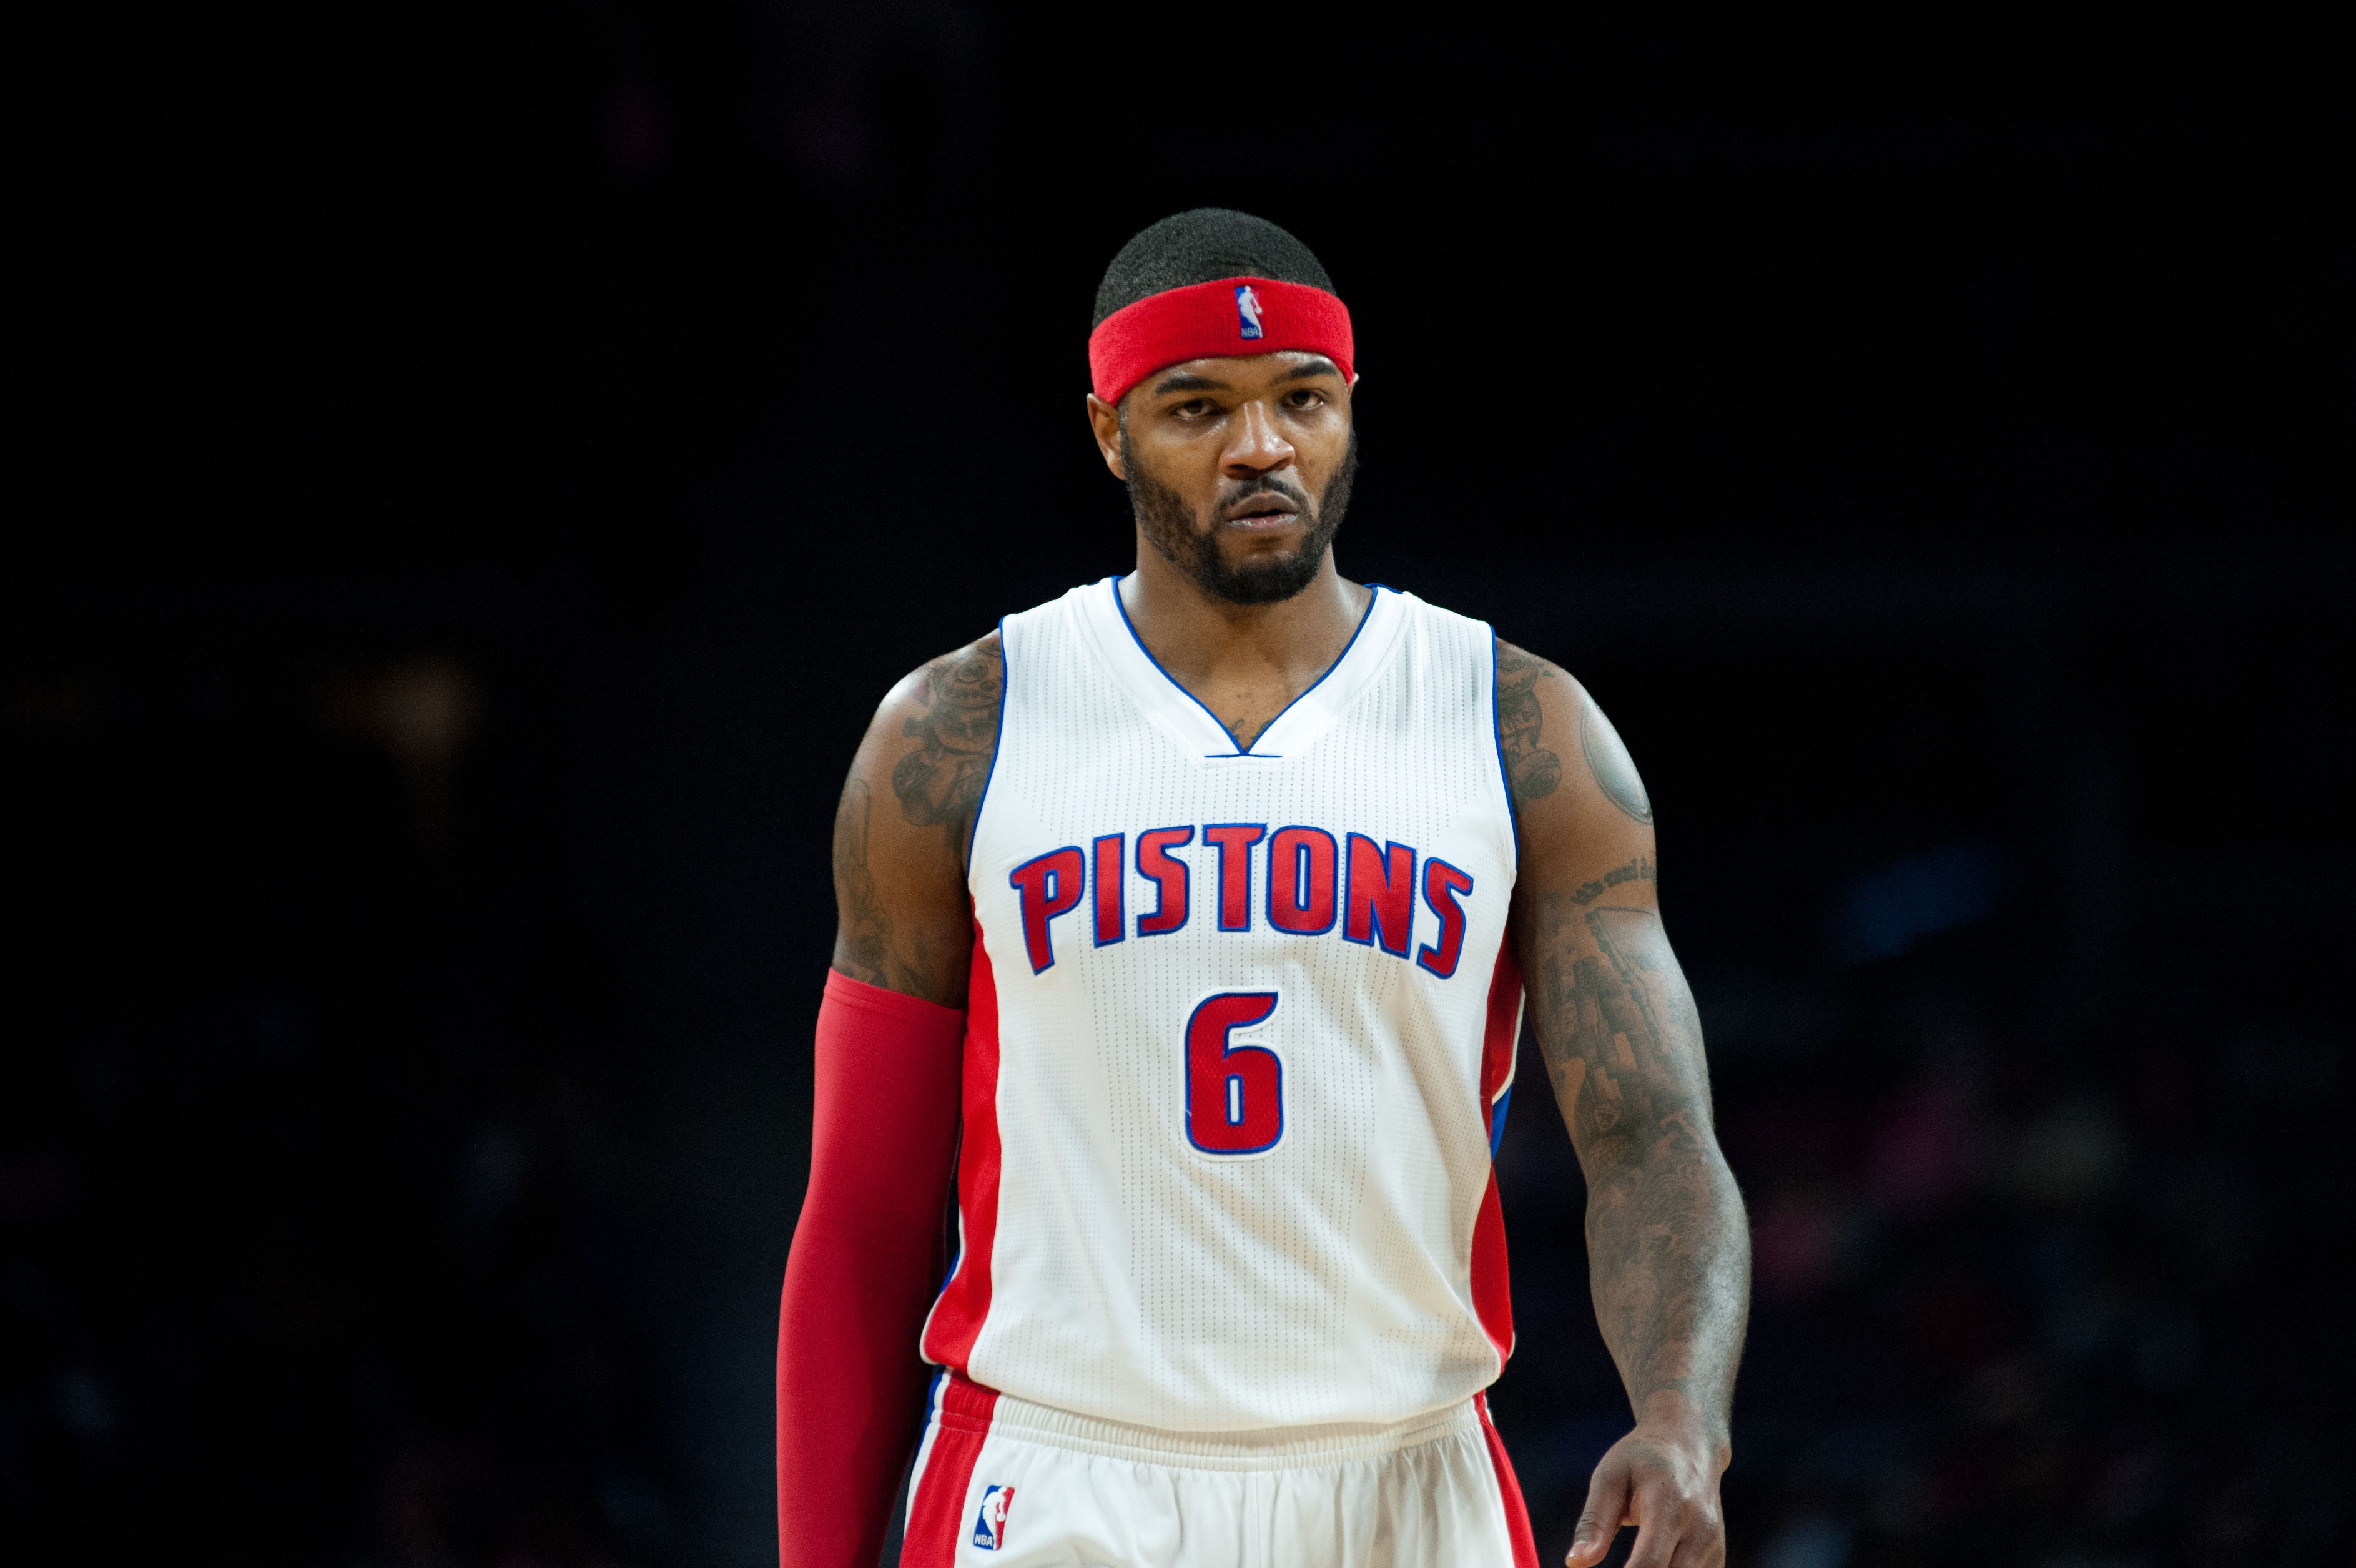 Josh Smith Signs To The Rockets